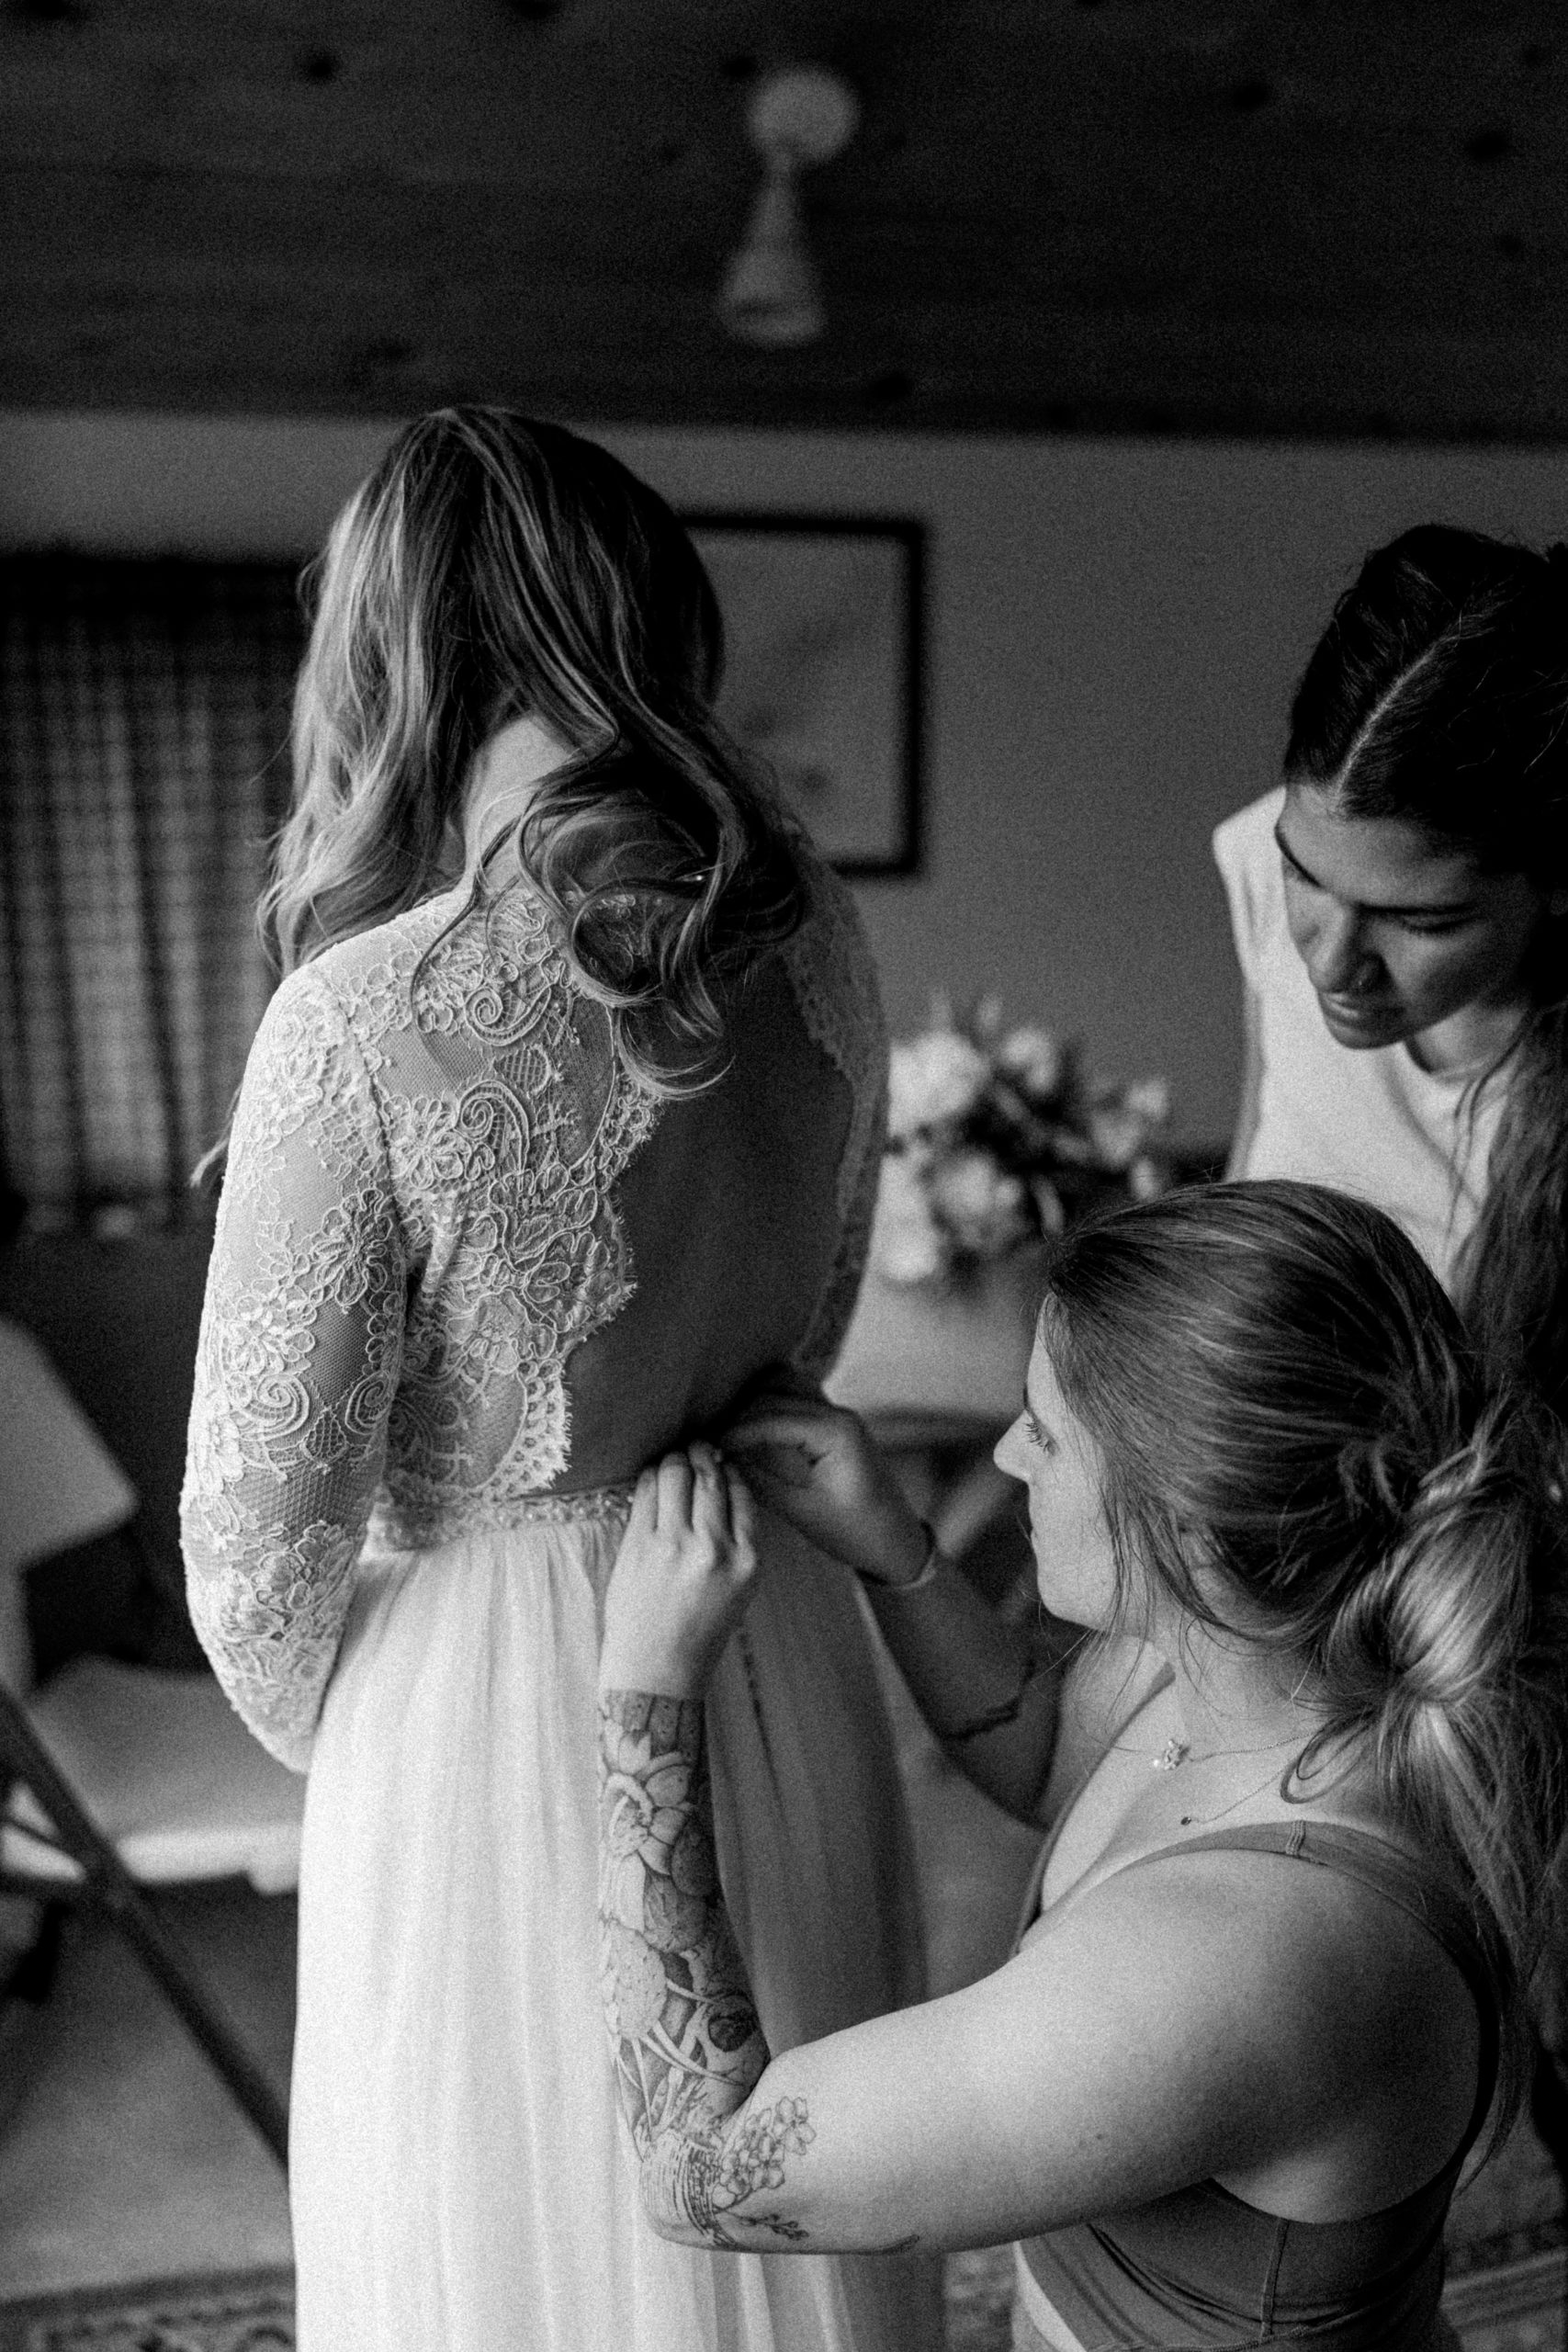 Black and white film photo of a bride's back, her friend buttoning up the back of her wedding gown.